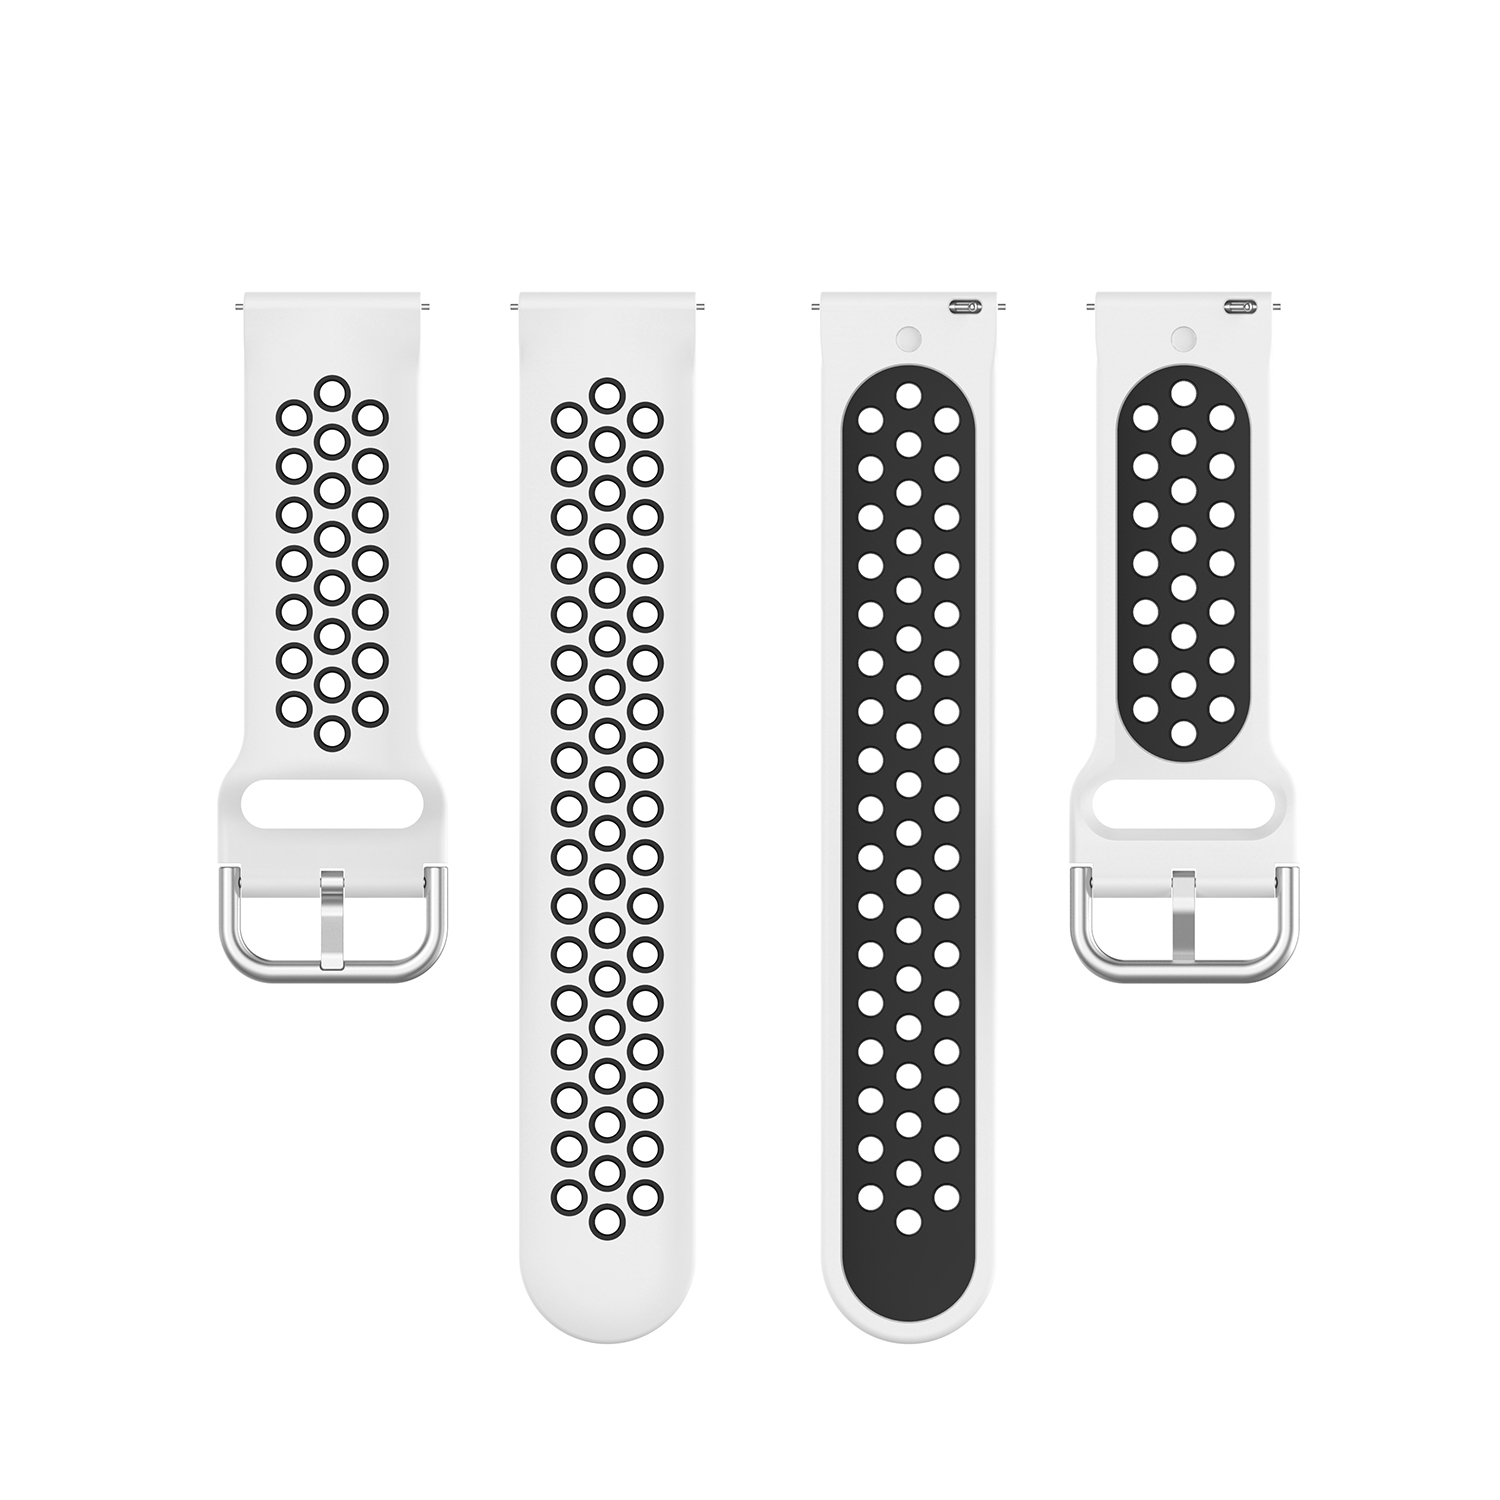 Bakeey-2022mm-Width-Universal-Sports-Dot-Pattern-Soft-Silicone-Watch-Band-Strap-Replacement-for-Sams-1736311-30